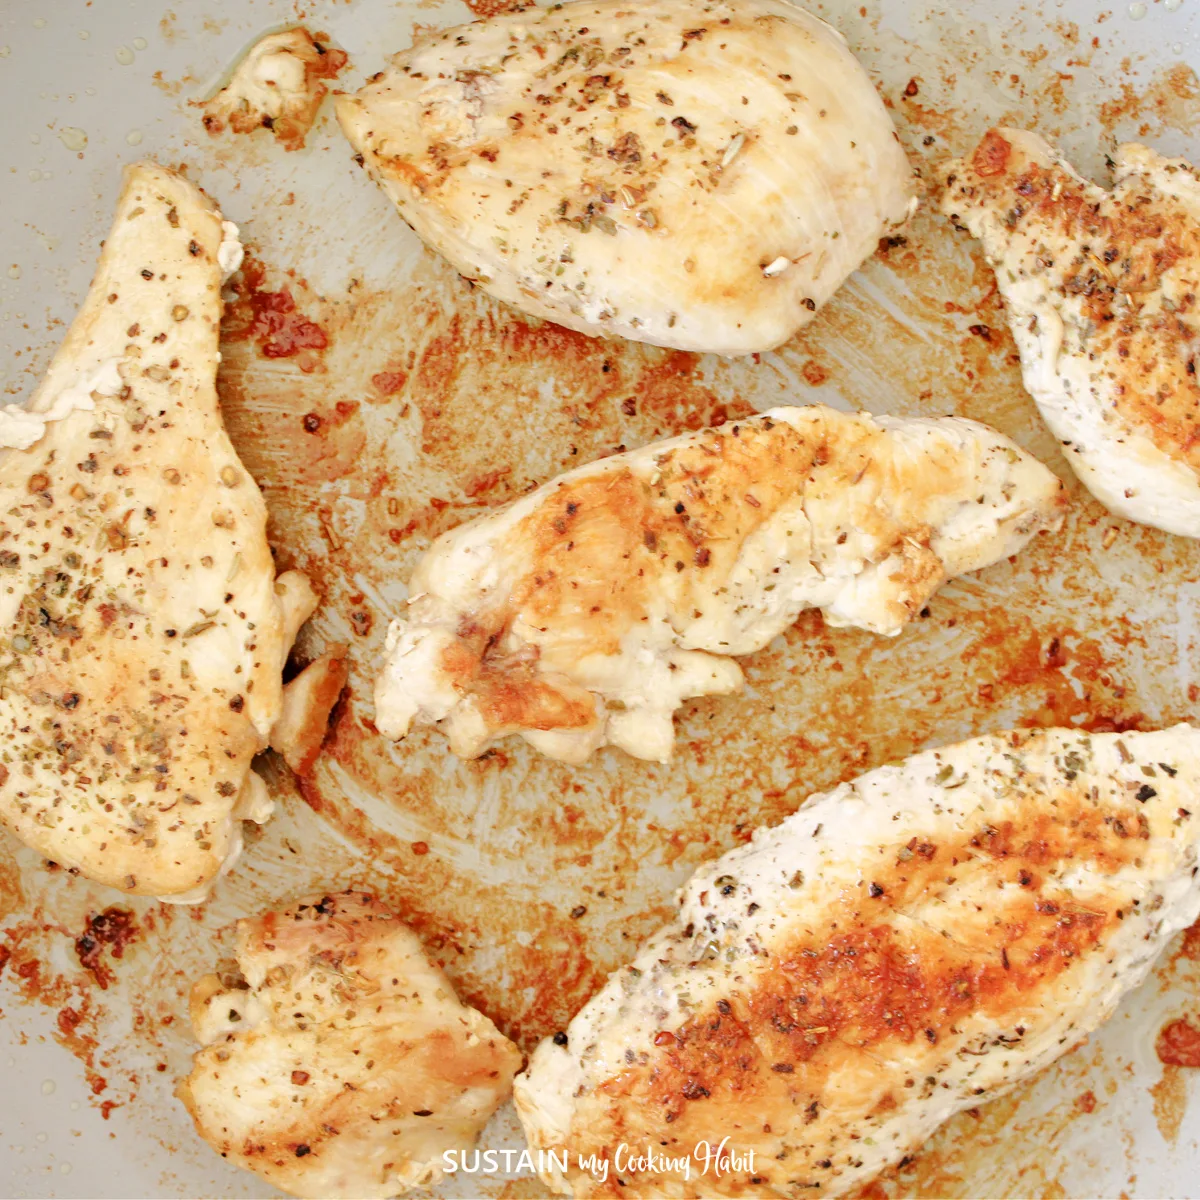 Cooked chicken breast in a pan.